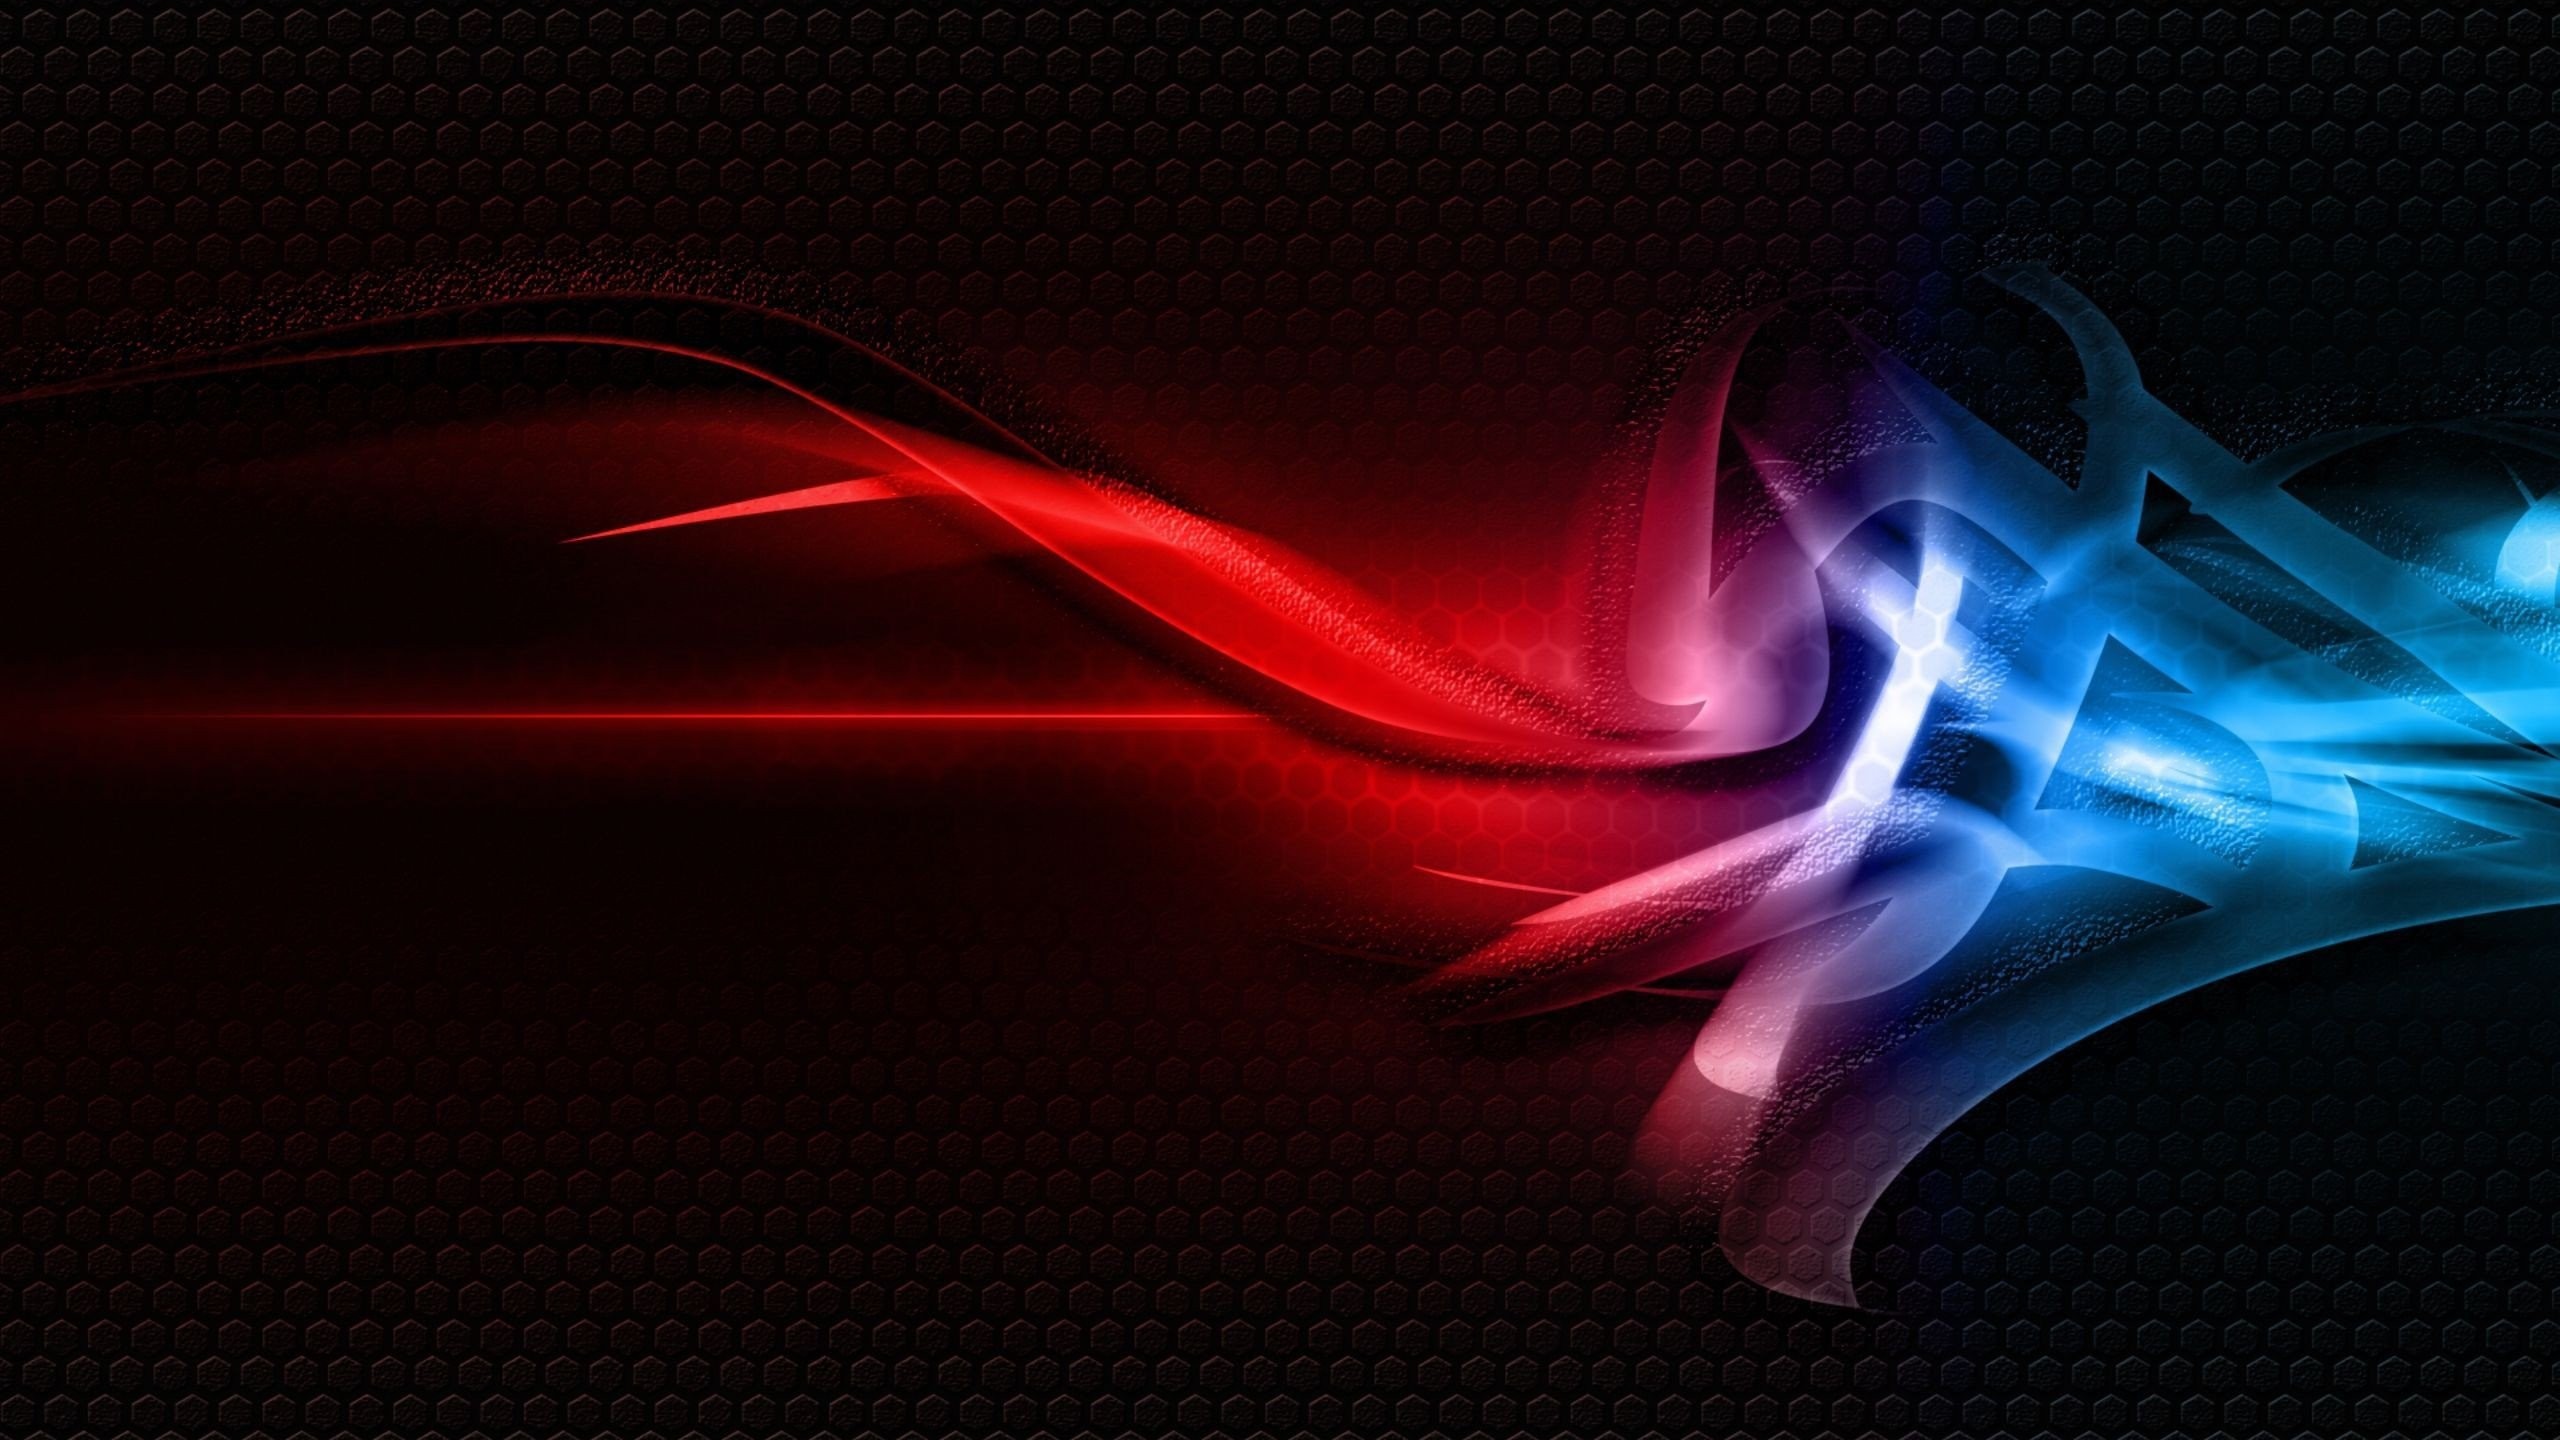 2560x1440 Wallpapers of 3D Abstract Graphics in HD 4K